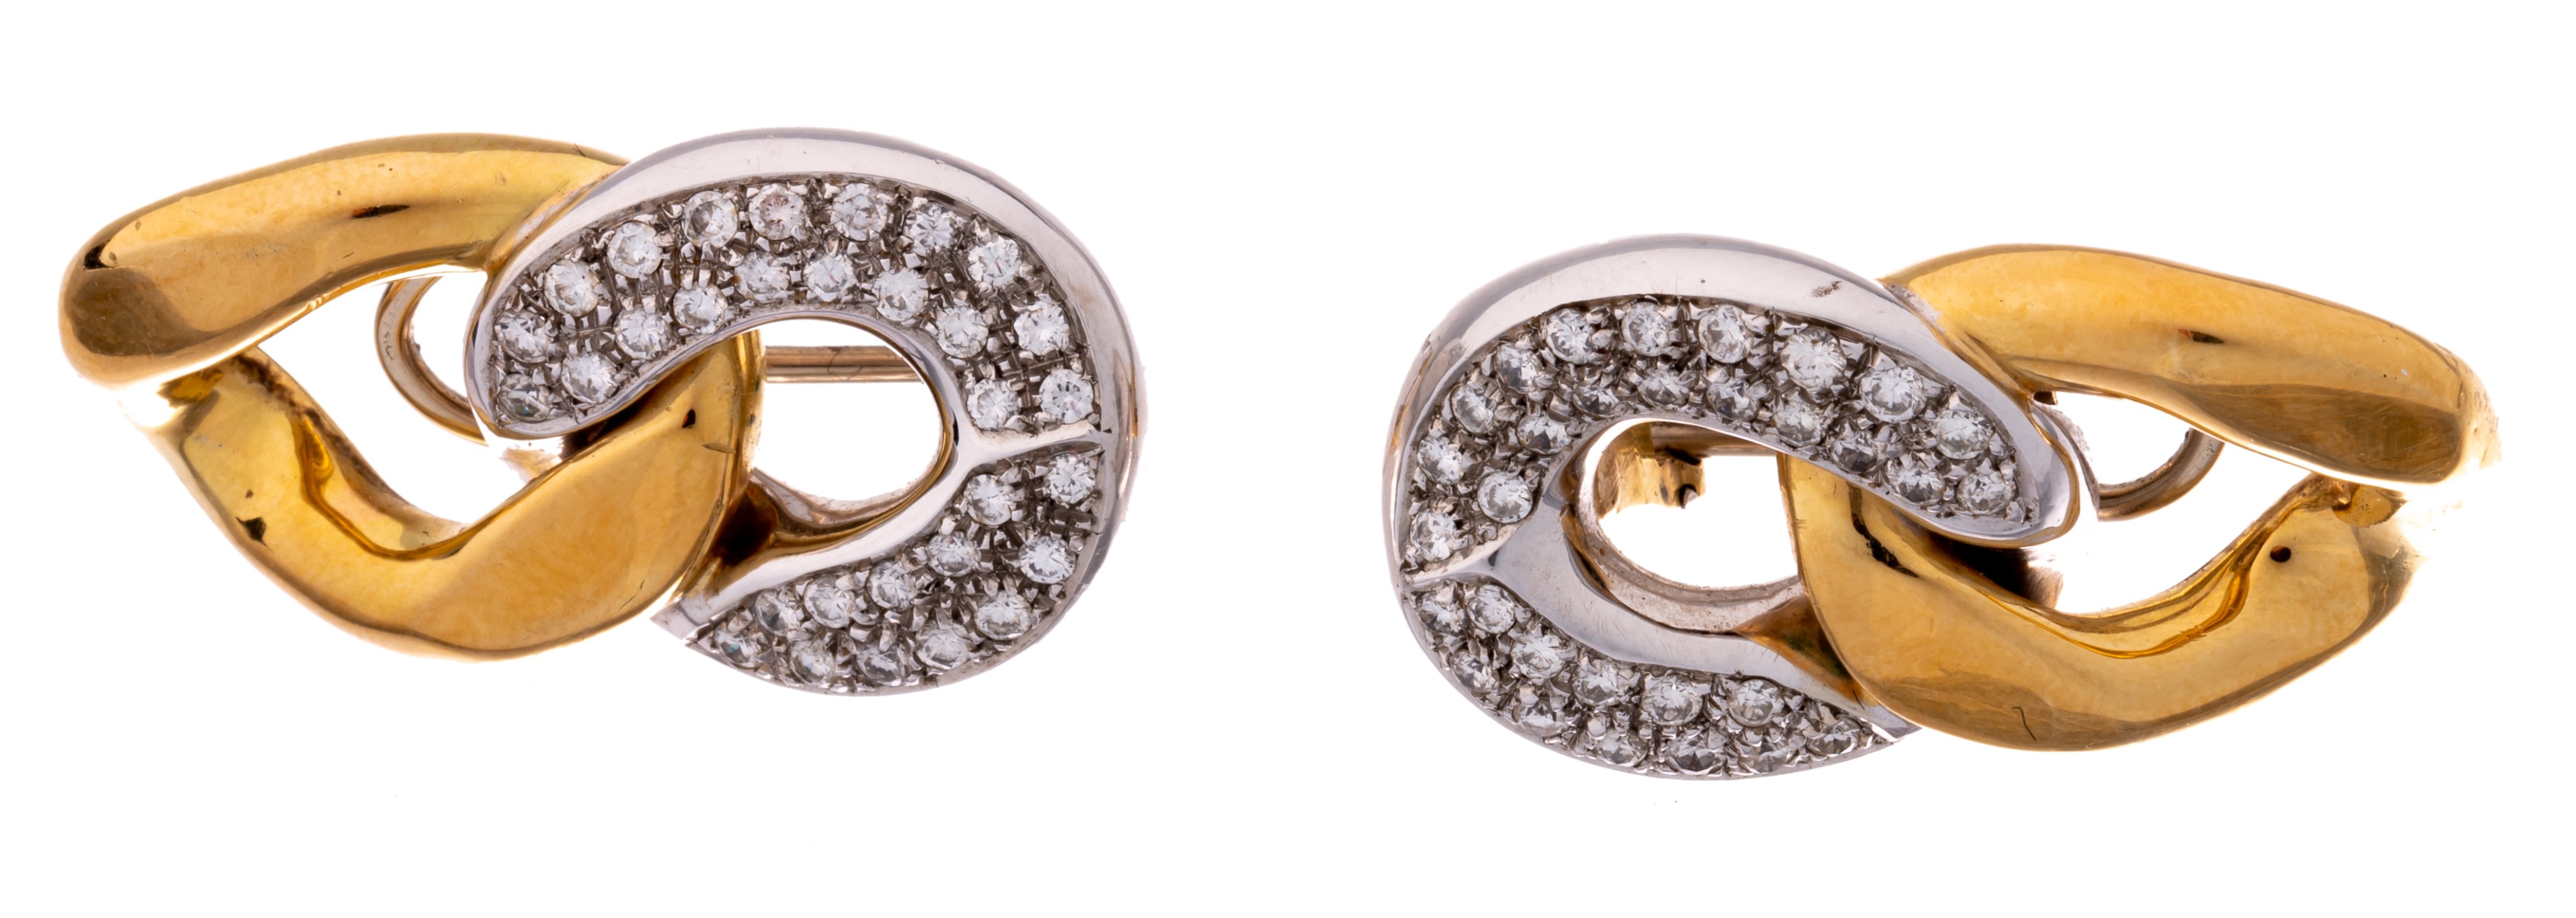 A pair of yellow and white 18ct gold earrings, set with brilliant-cut diamonds, H 4 cm - Image 3 of 4